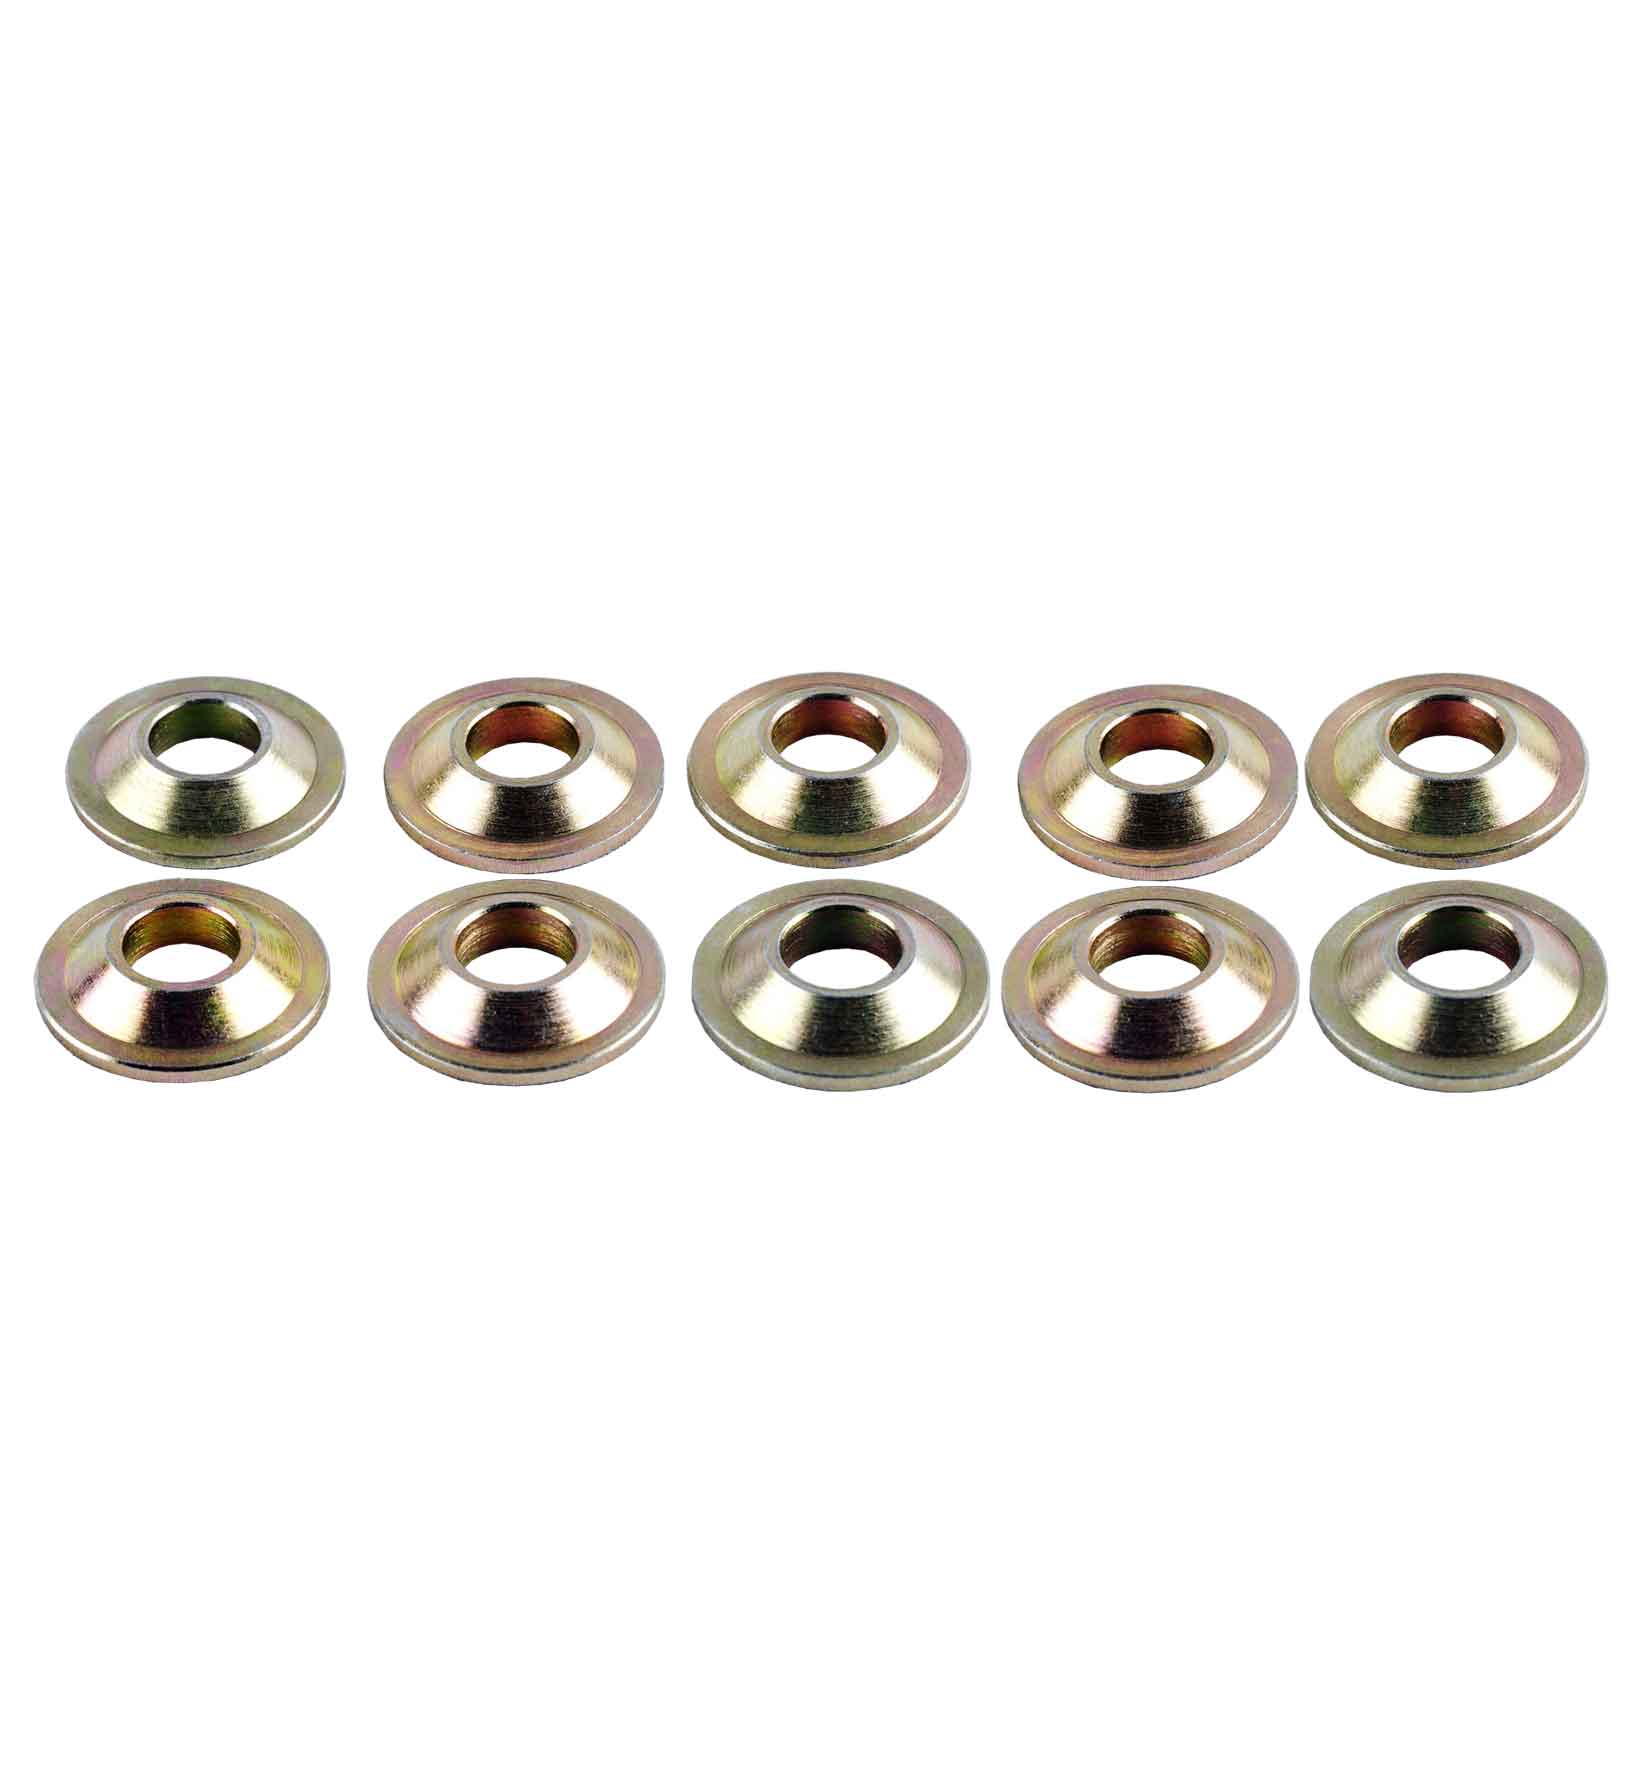 M12 Rod End Misalignment Spacers 12mm (Pack of 10)